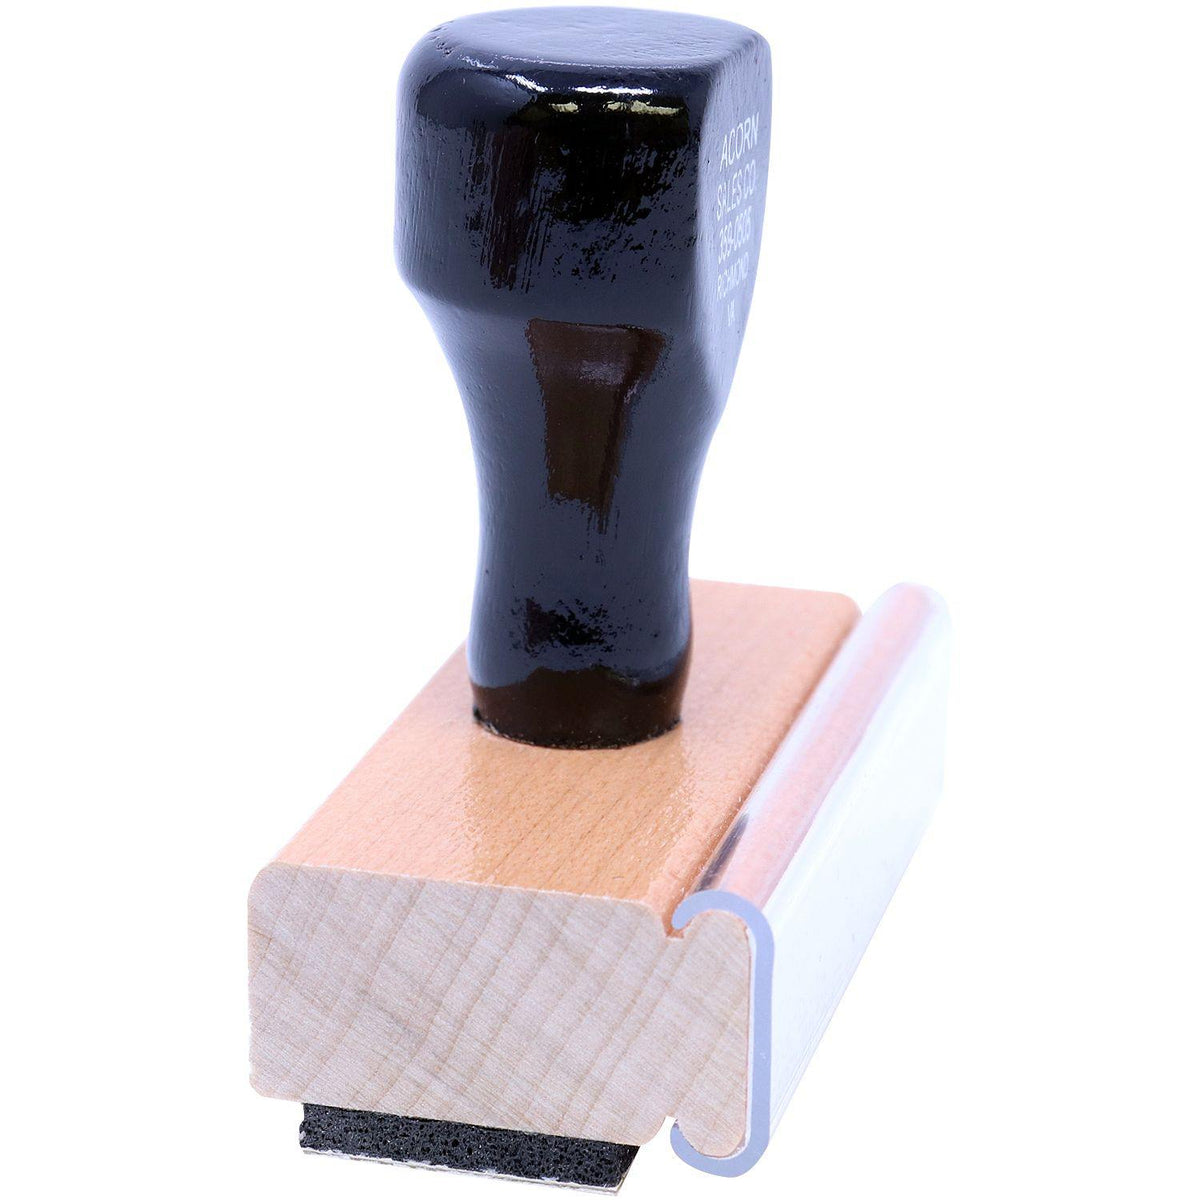 Side View of Large Faxed with Round Date Box Rubber Stamp at an Angle